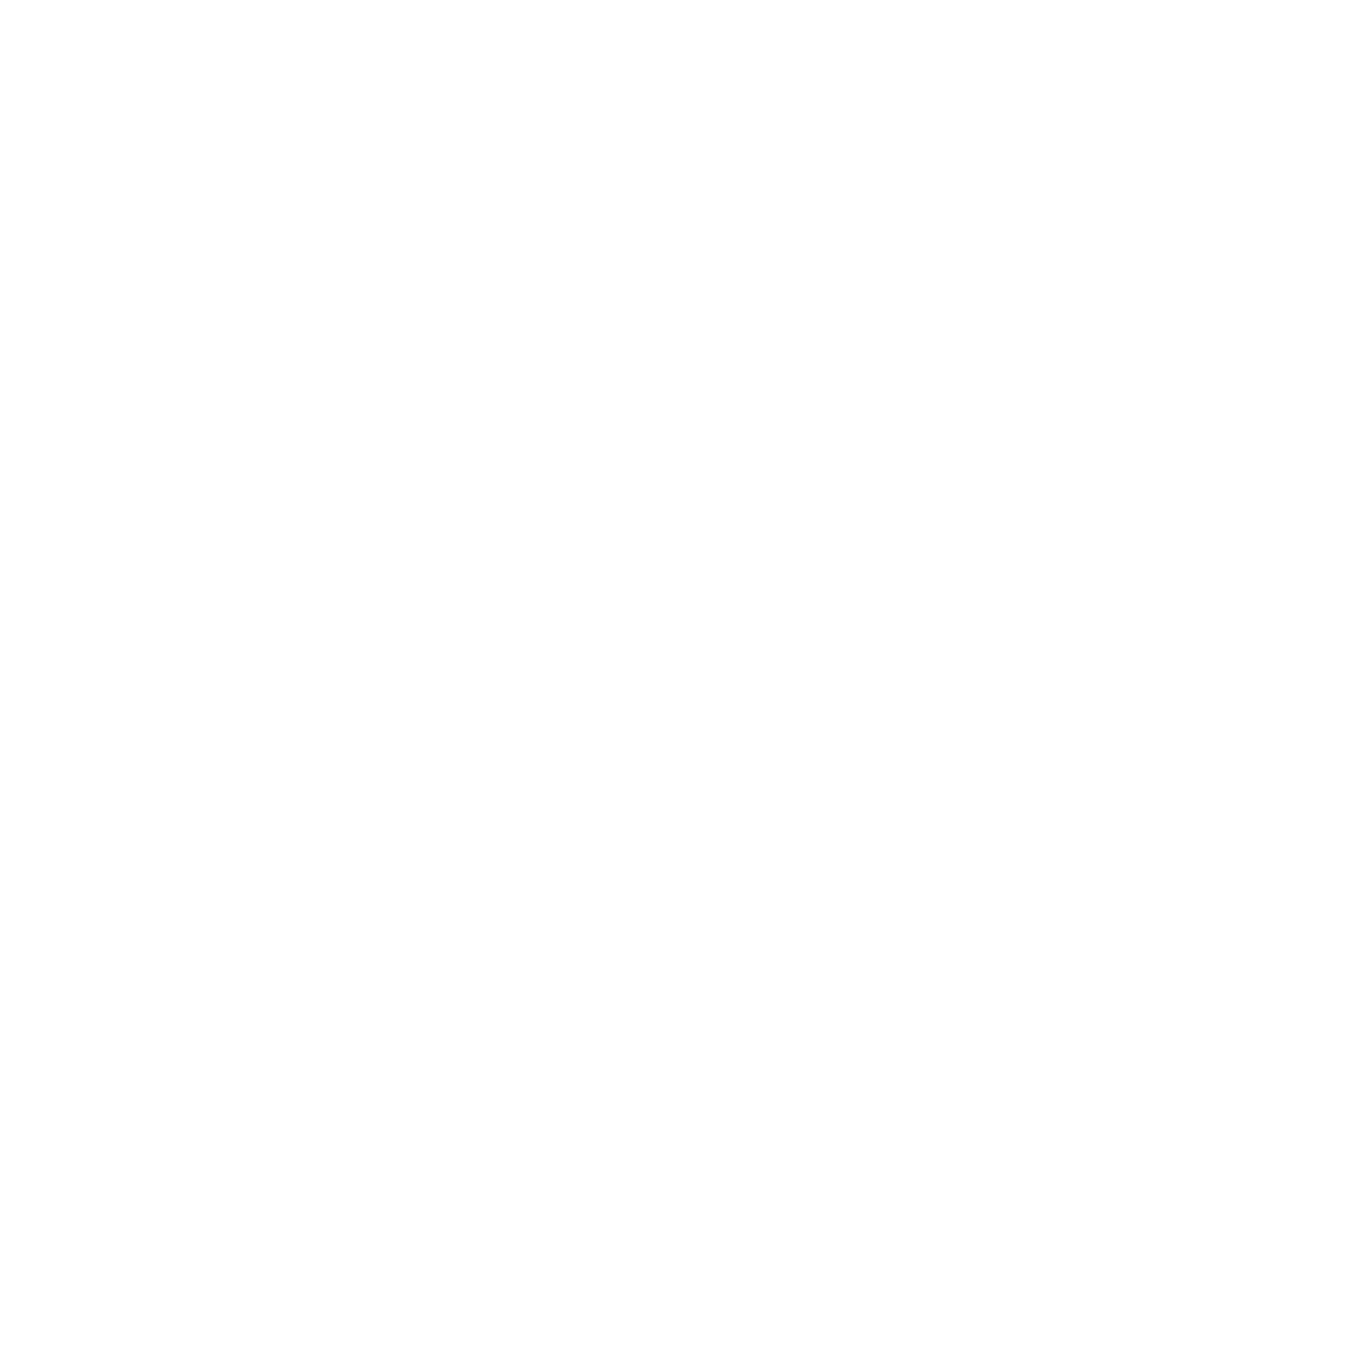 Writers at Woody Point